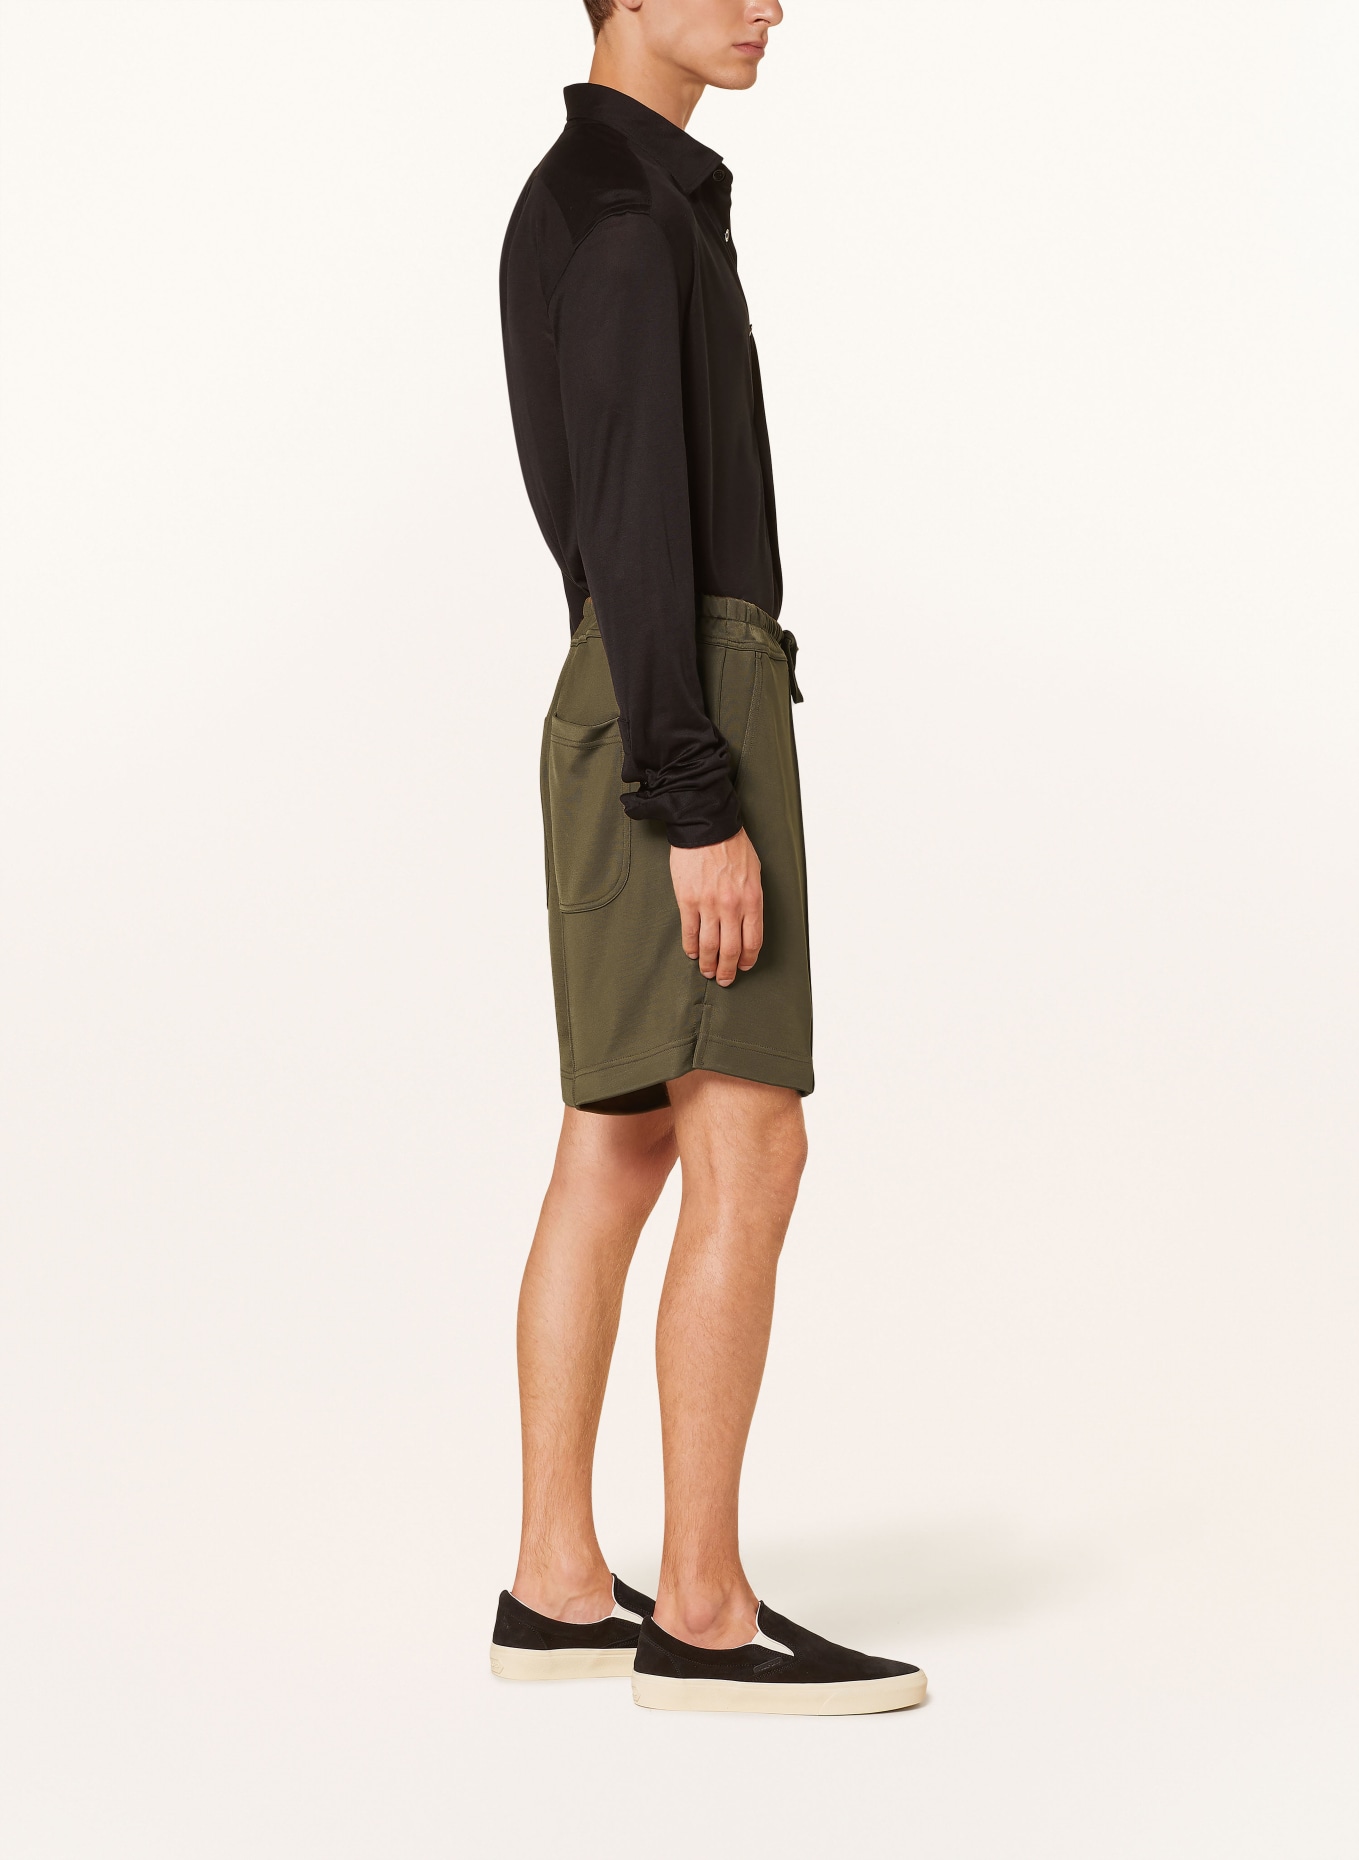 TOM FORD Shorts in jogger style, Color: KHAKI (Image 4)